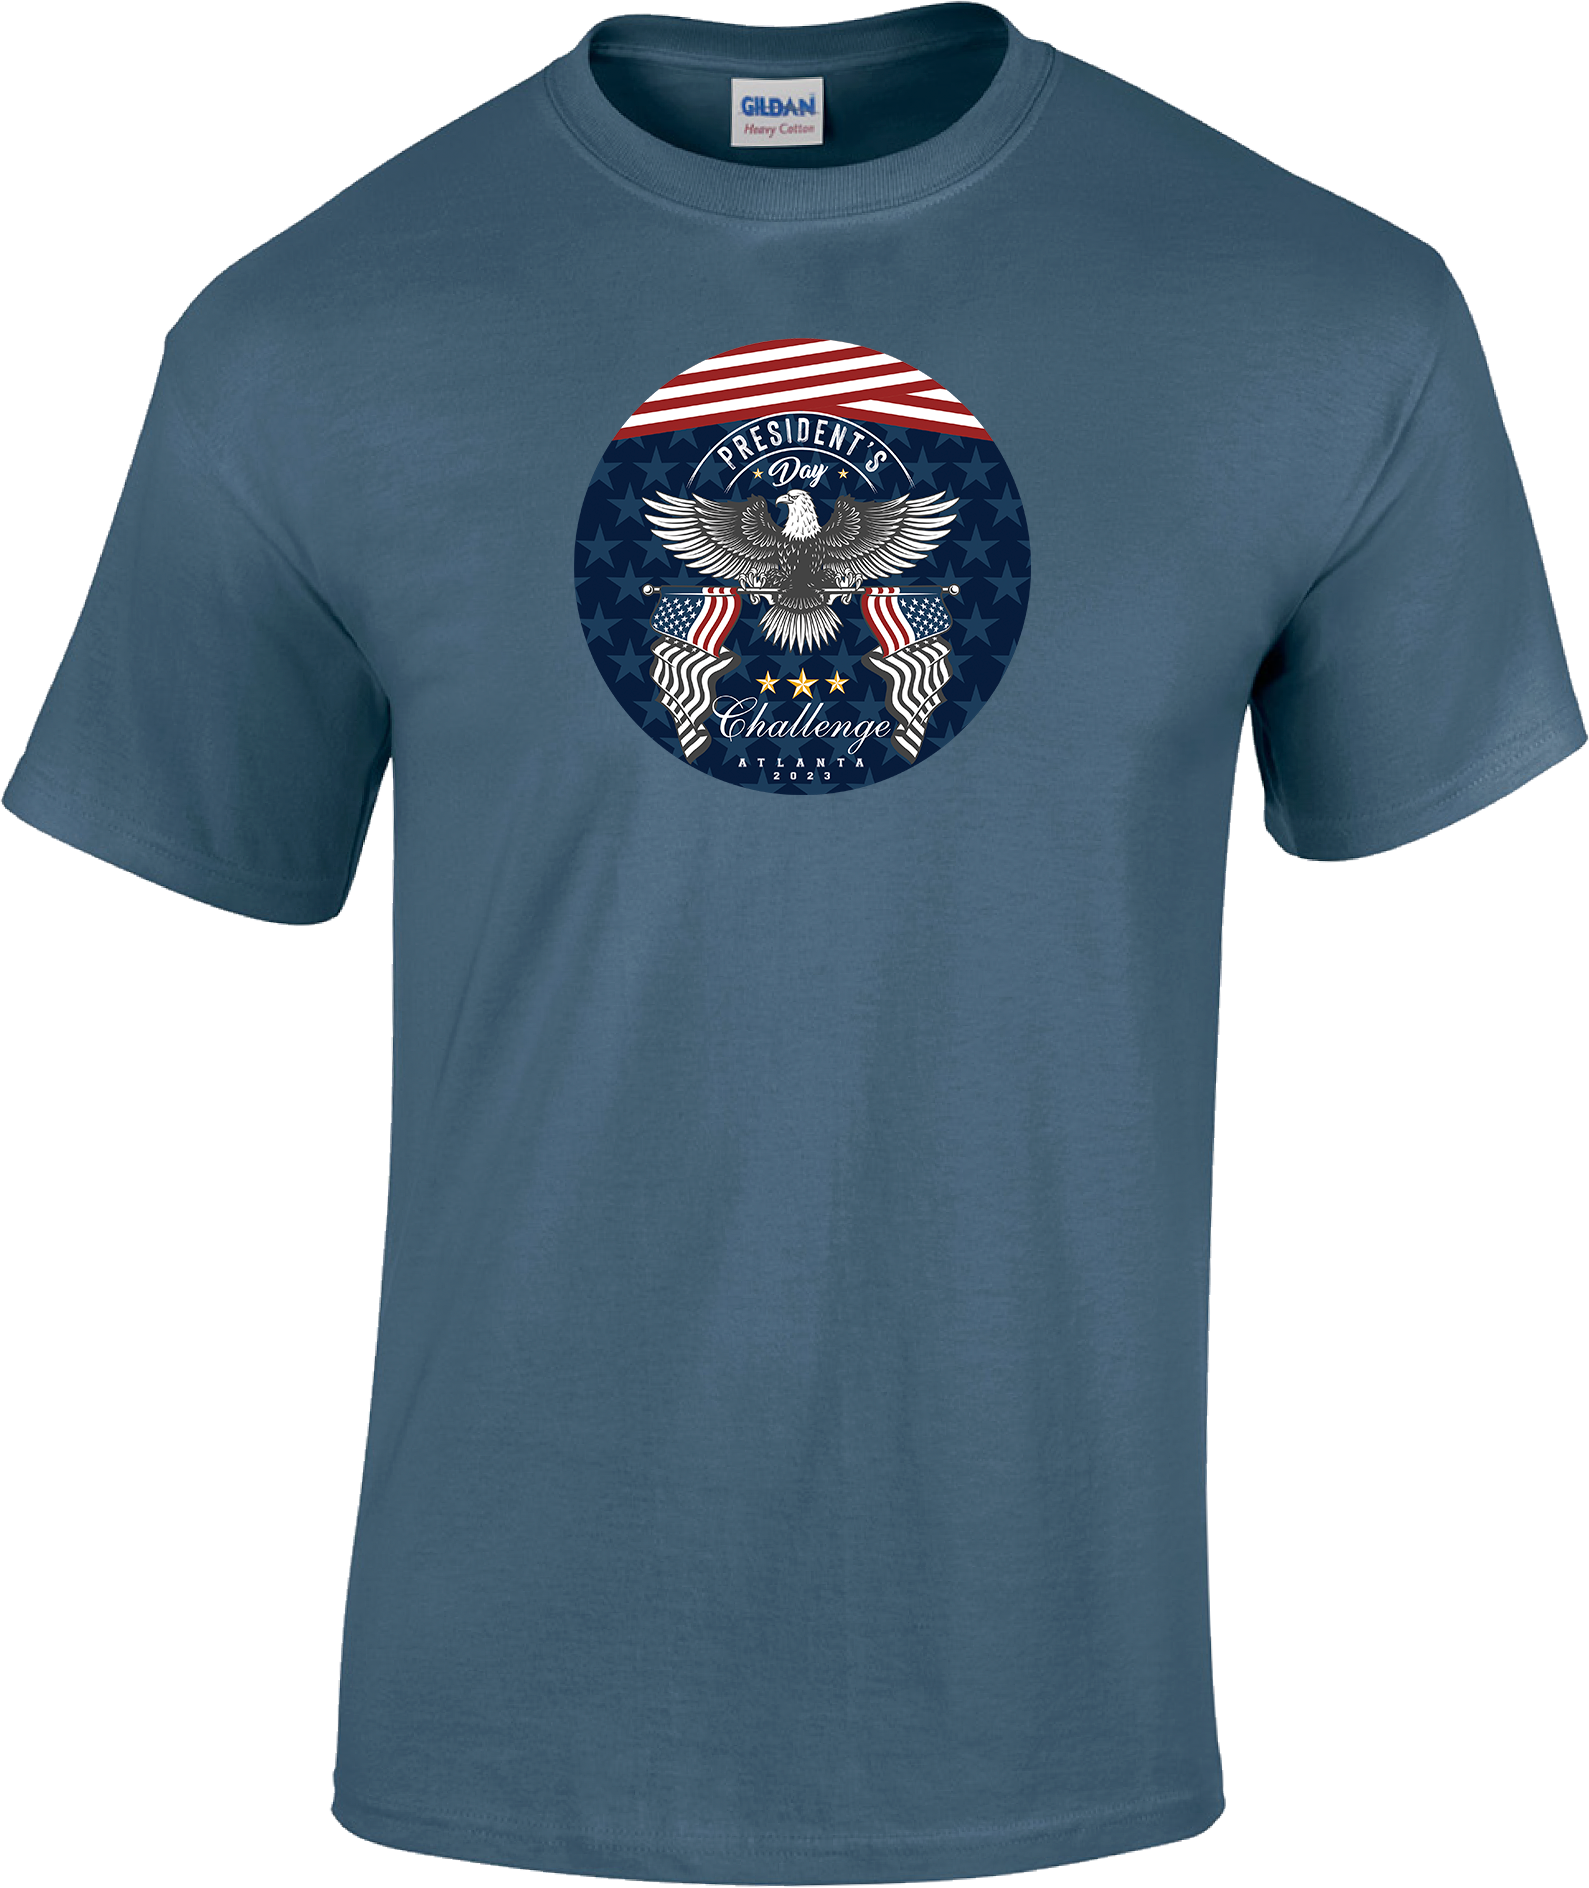 SHORT SLEEVES - 2023 Presidents Day Challenge